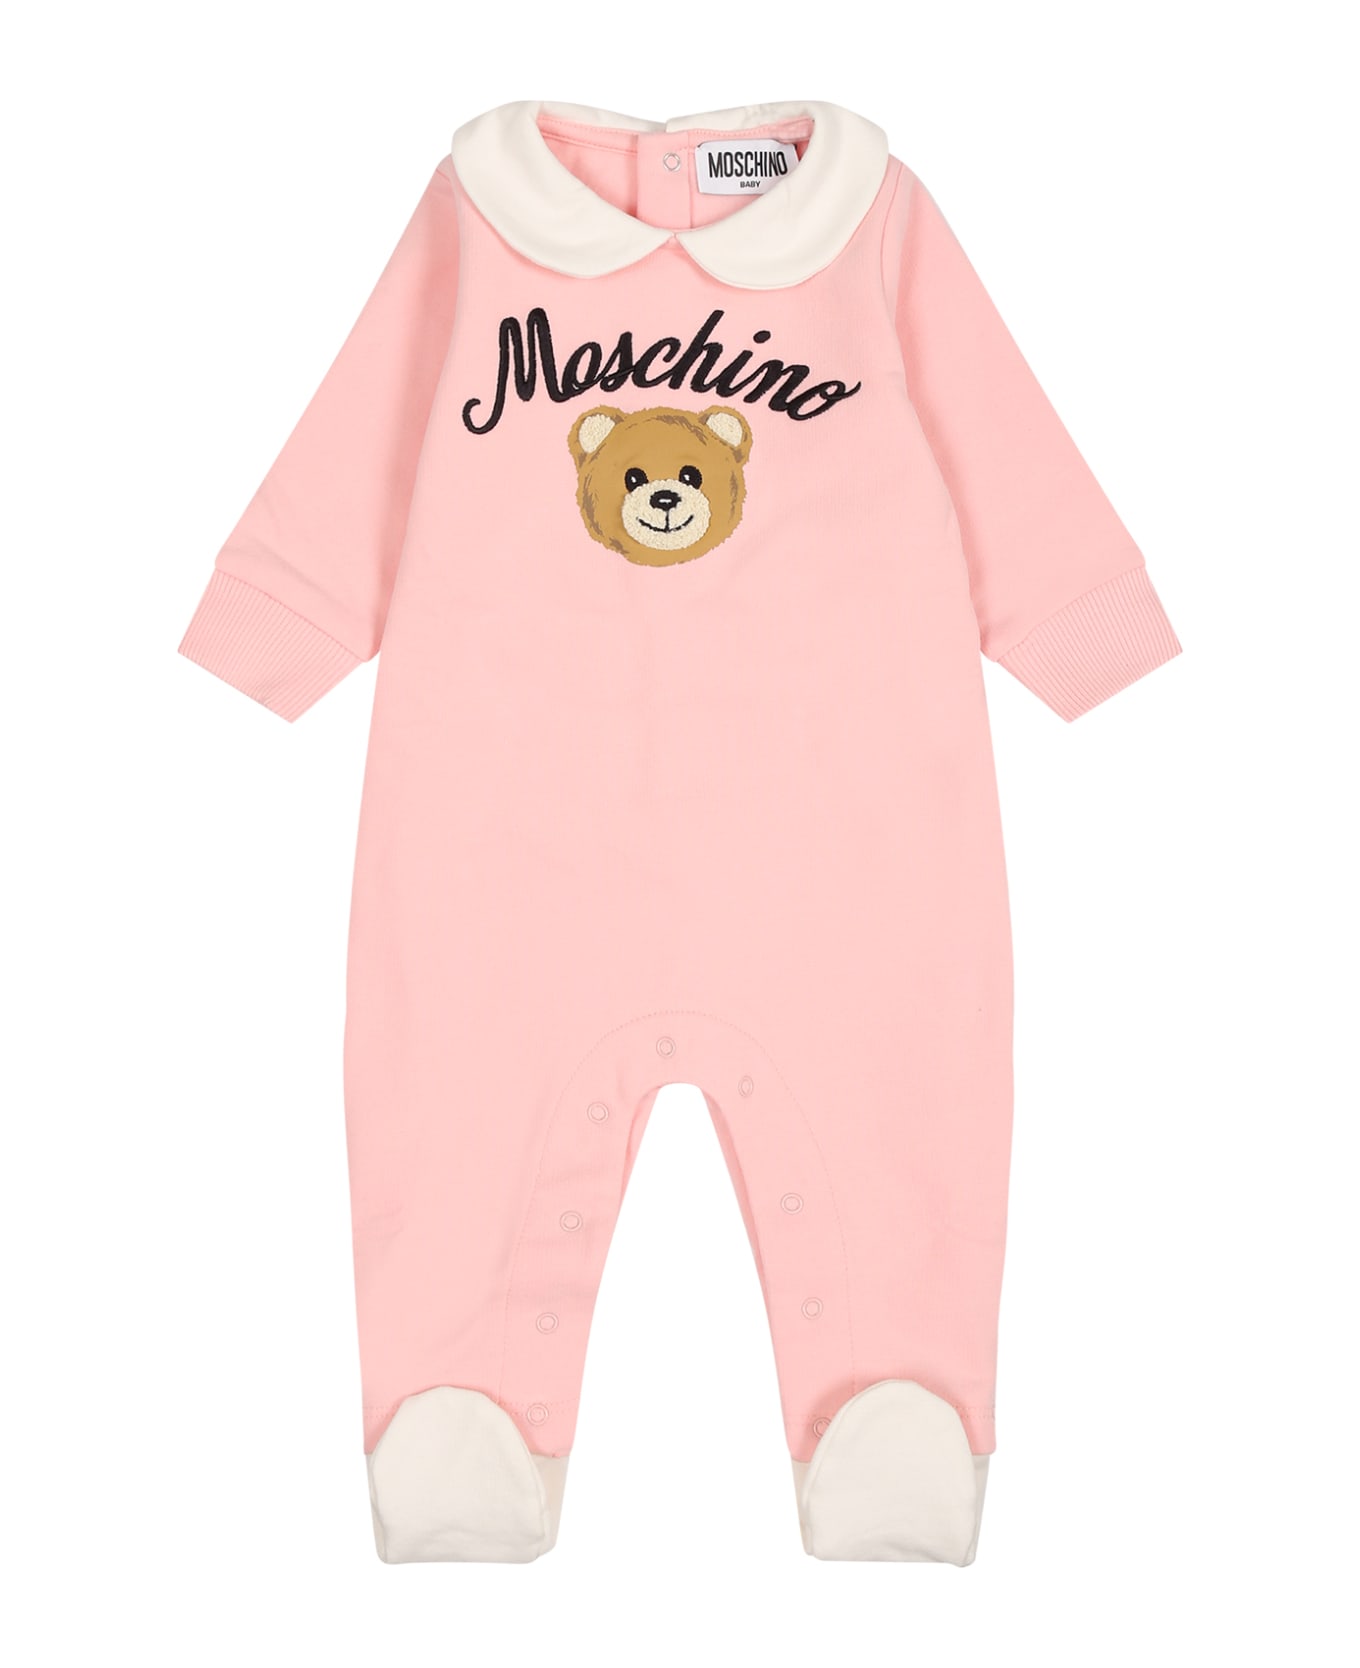 Moschino Pink Babygrow For Baby Girl With Teddy Bear And Logo - Pink